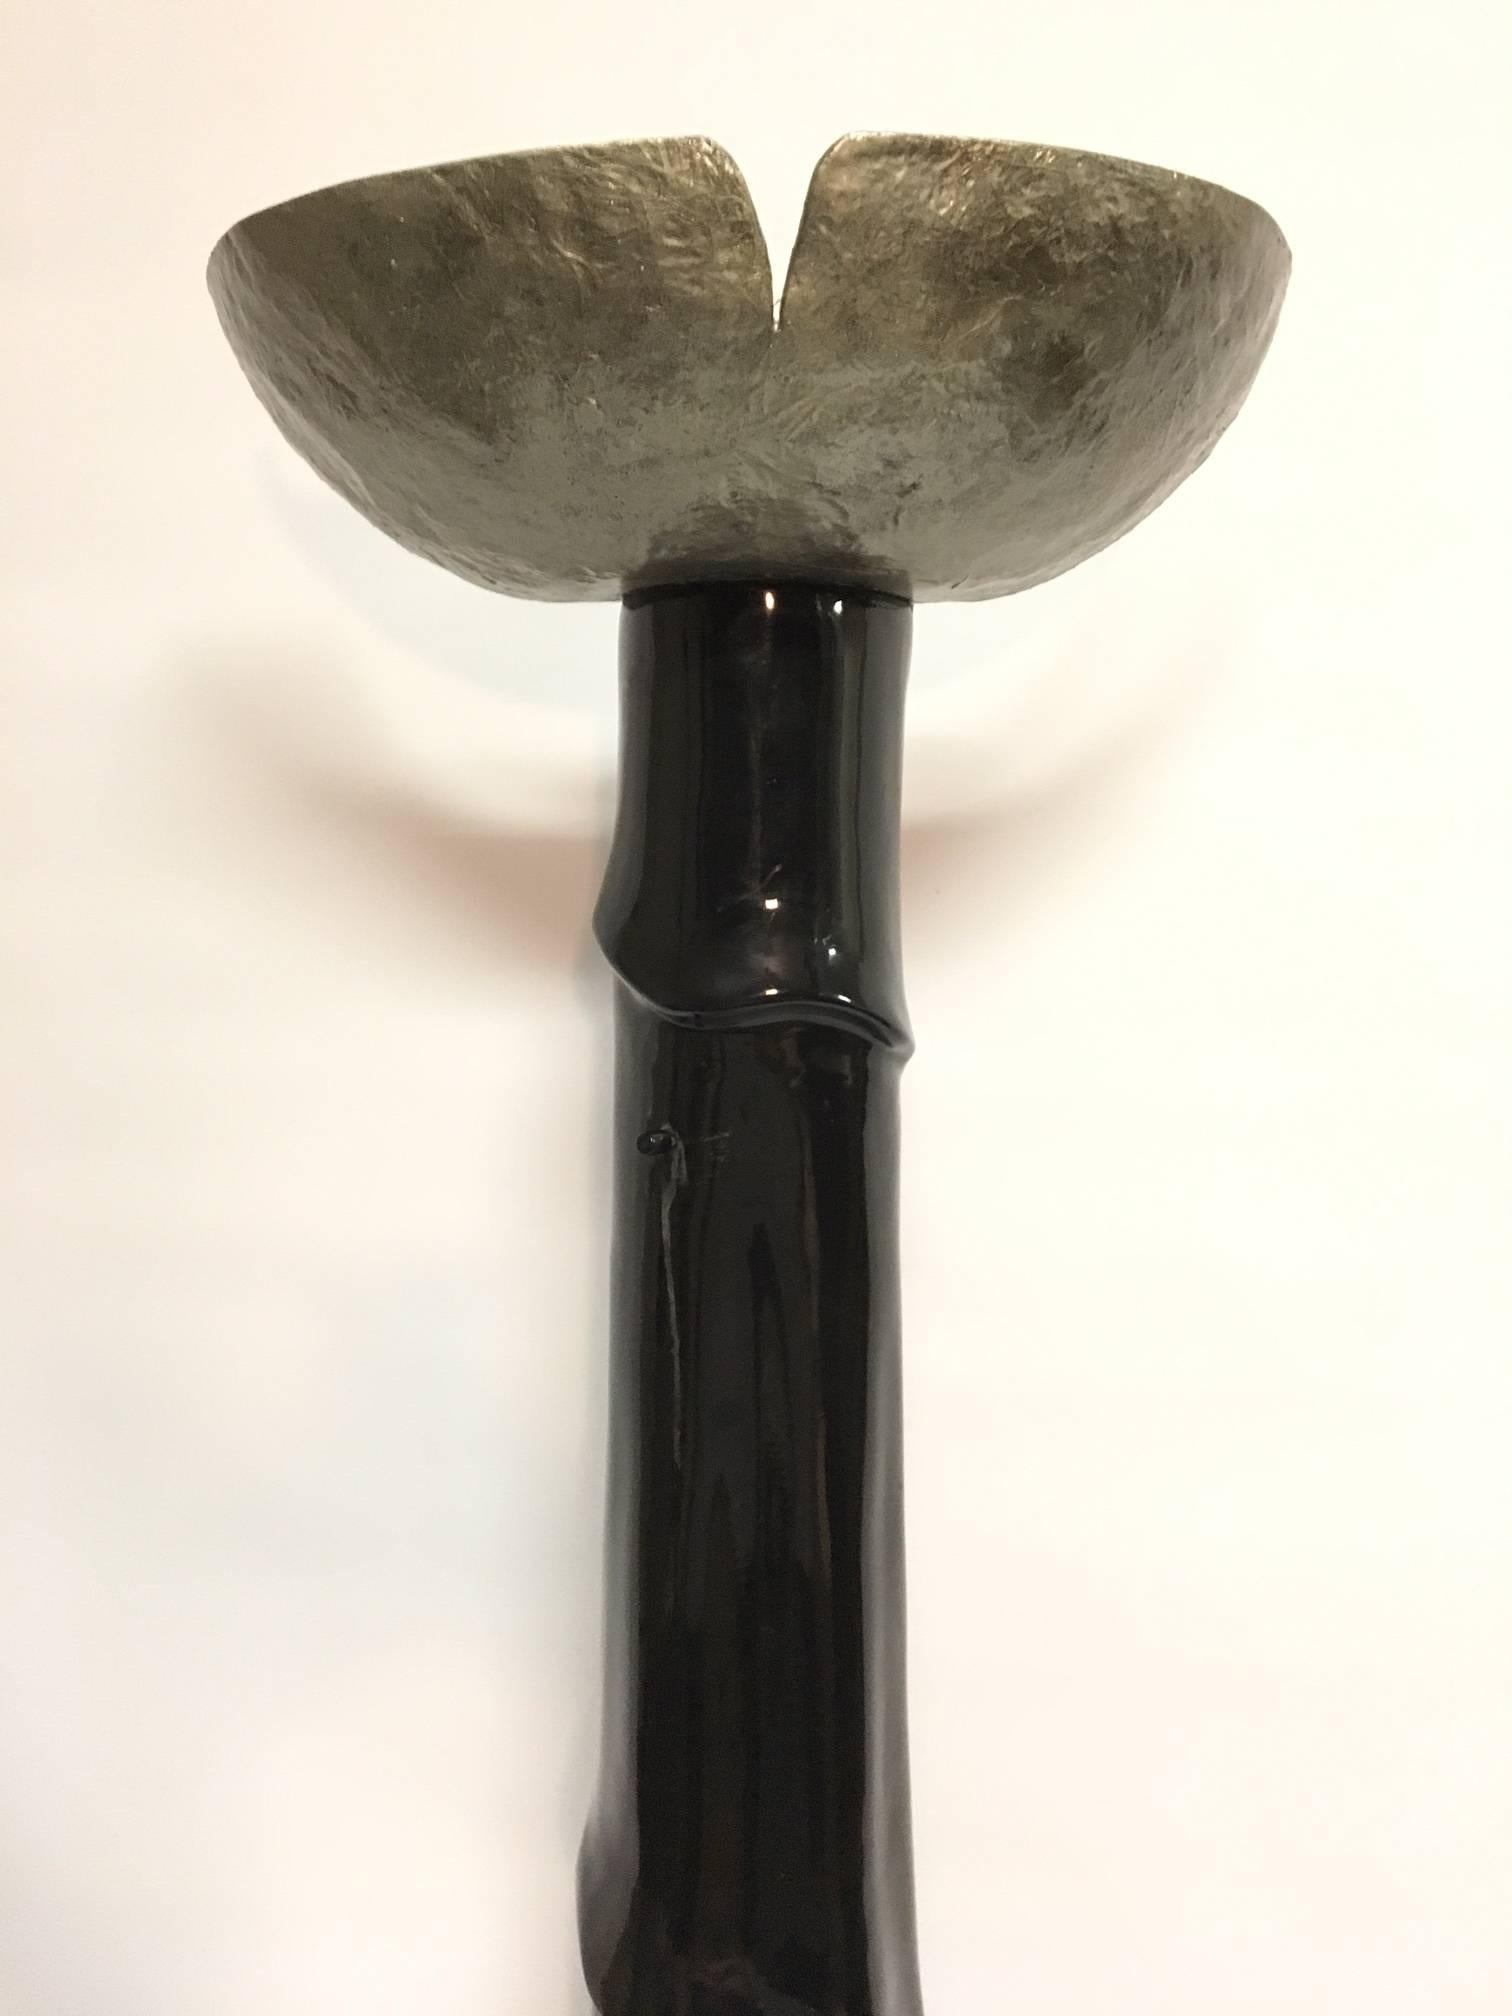 Unusual sculptural floor or wall lamp designed to stand against a wall. Tall base with carved drape form with silver shade. Made of cast resin. Holds two standard light bulbs. Measures: Stands 74.5